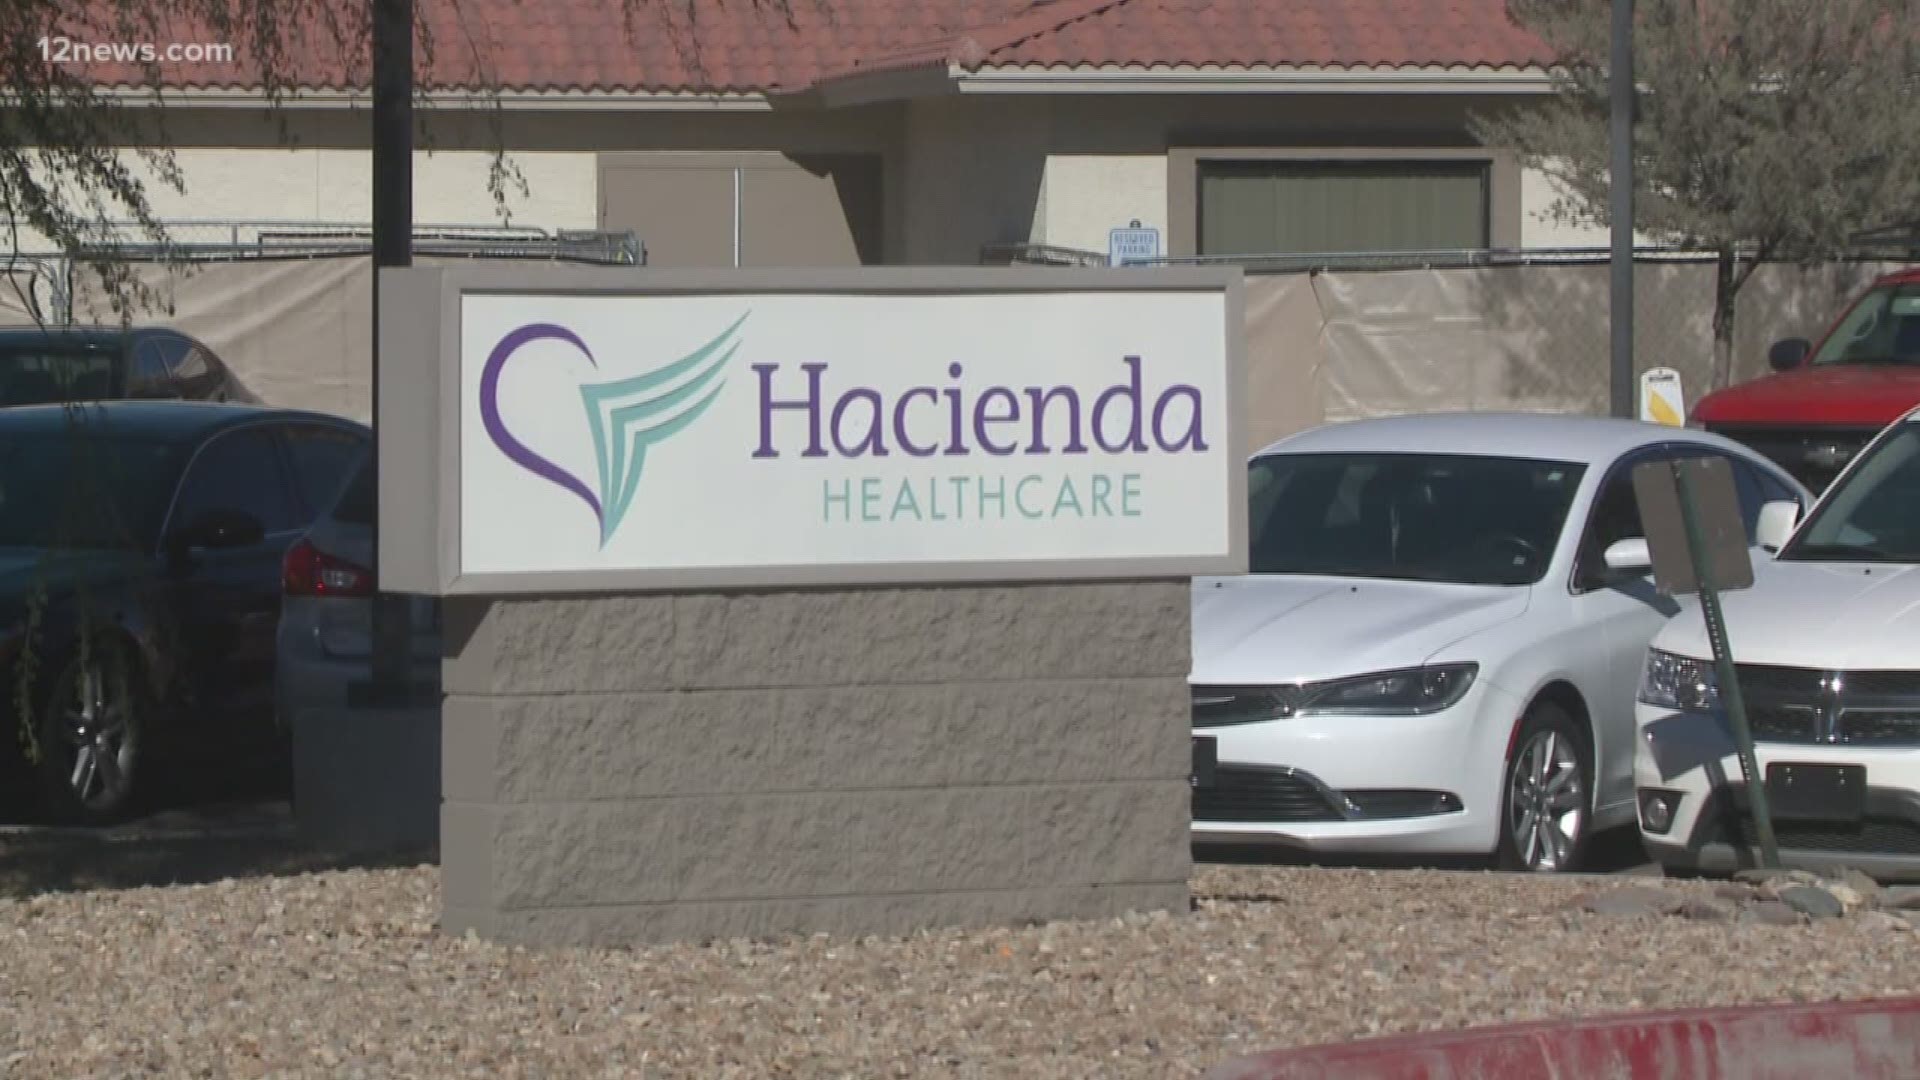 Police have served subpoenas to all male employees at Hacienda Healthcare to help determine who impregnated a patient in a vegetative state. We verify the process of DNA testing.